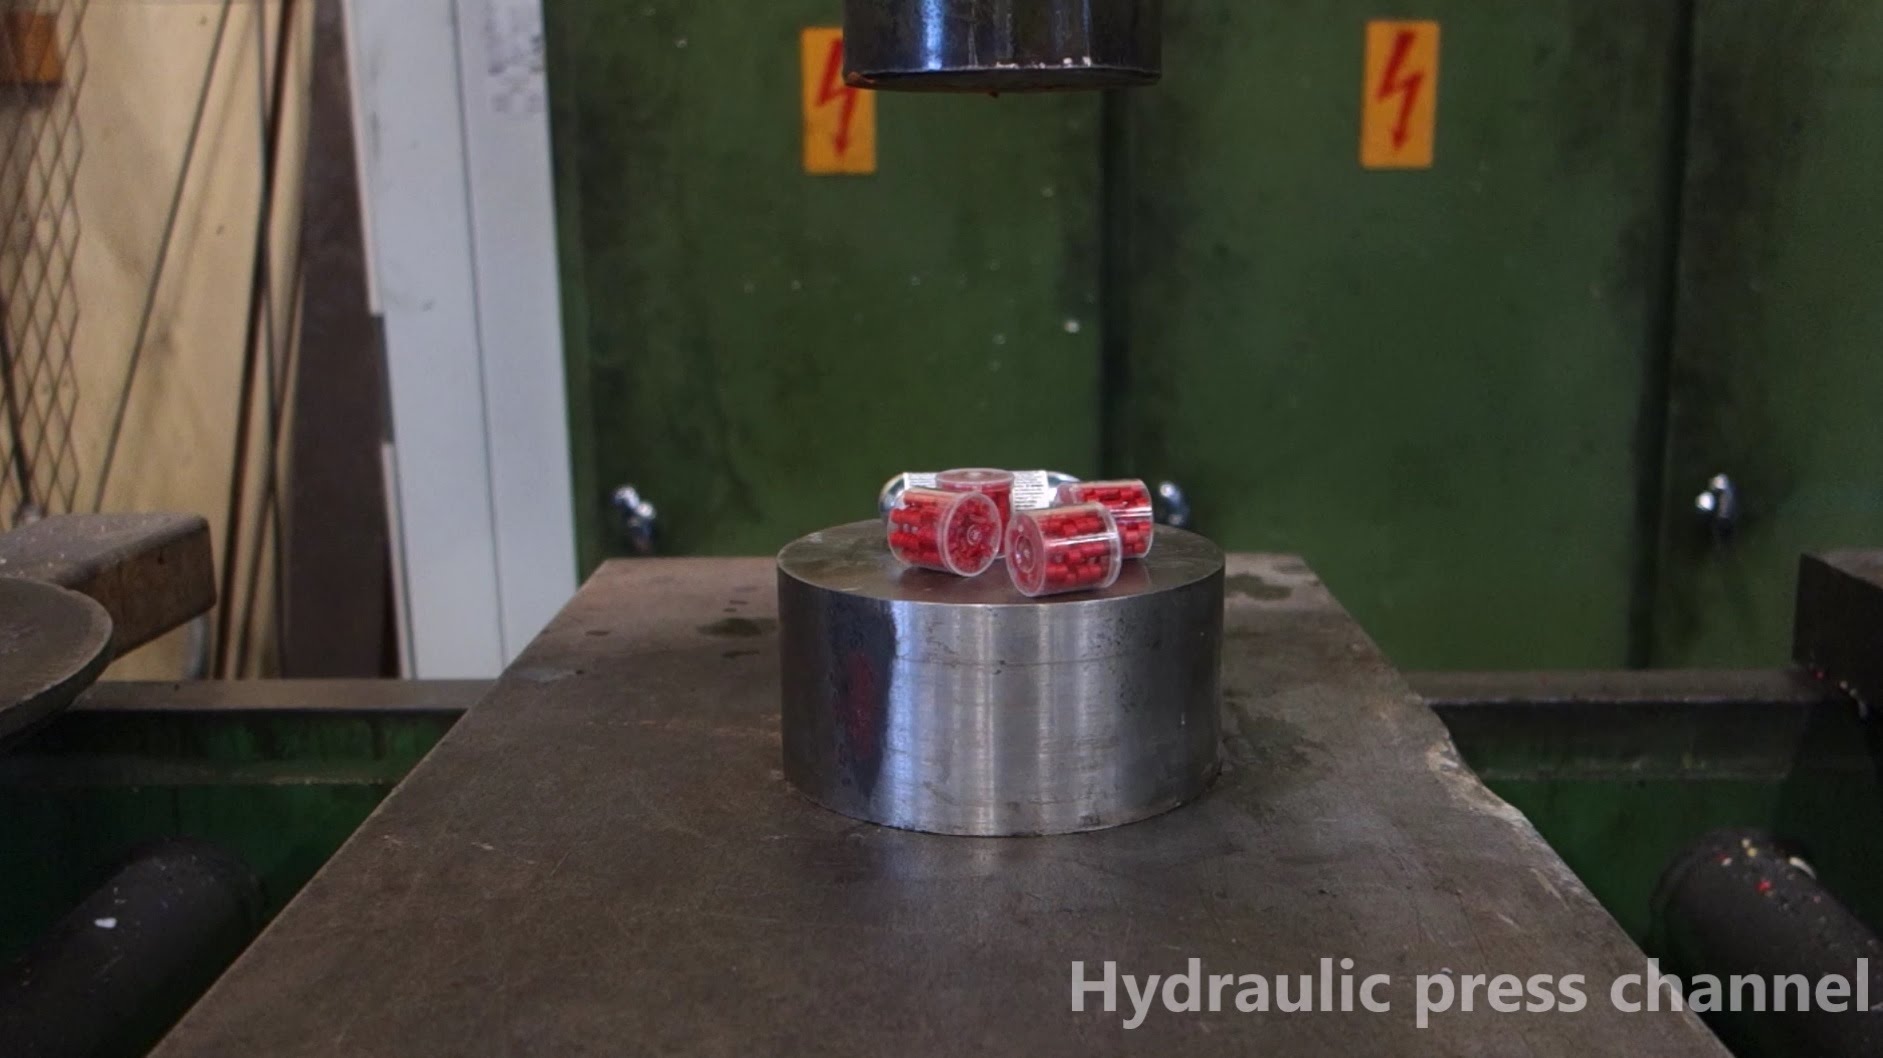 Crushing toy cars with hydraulic press 